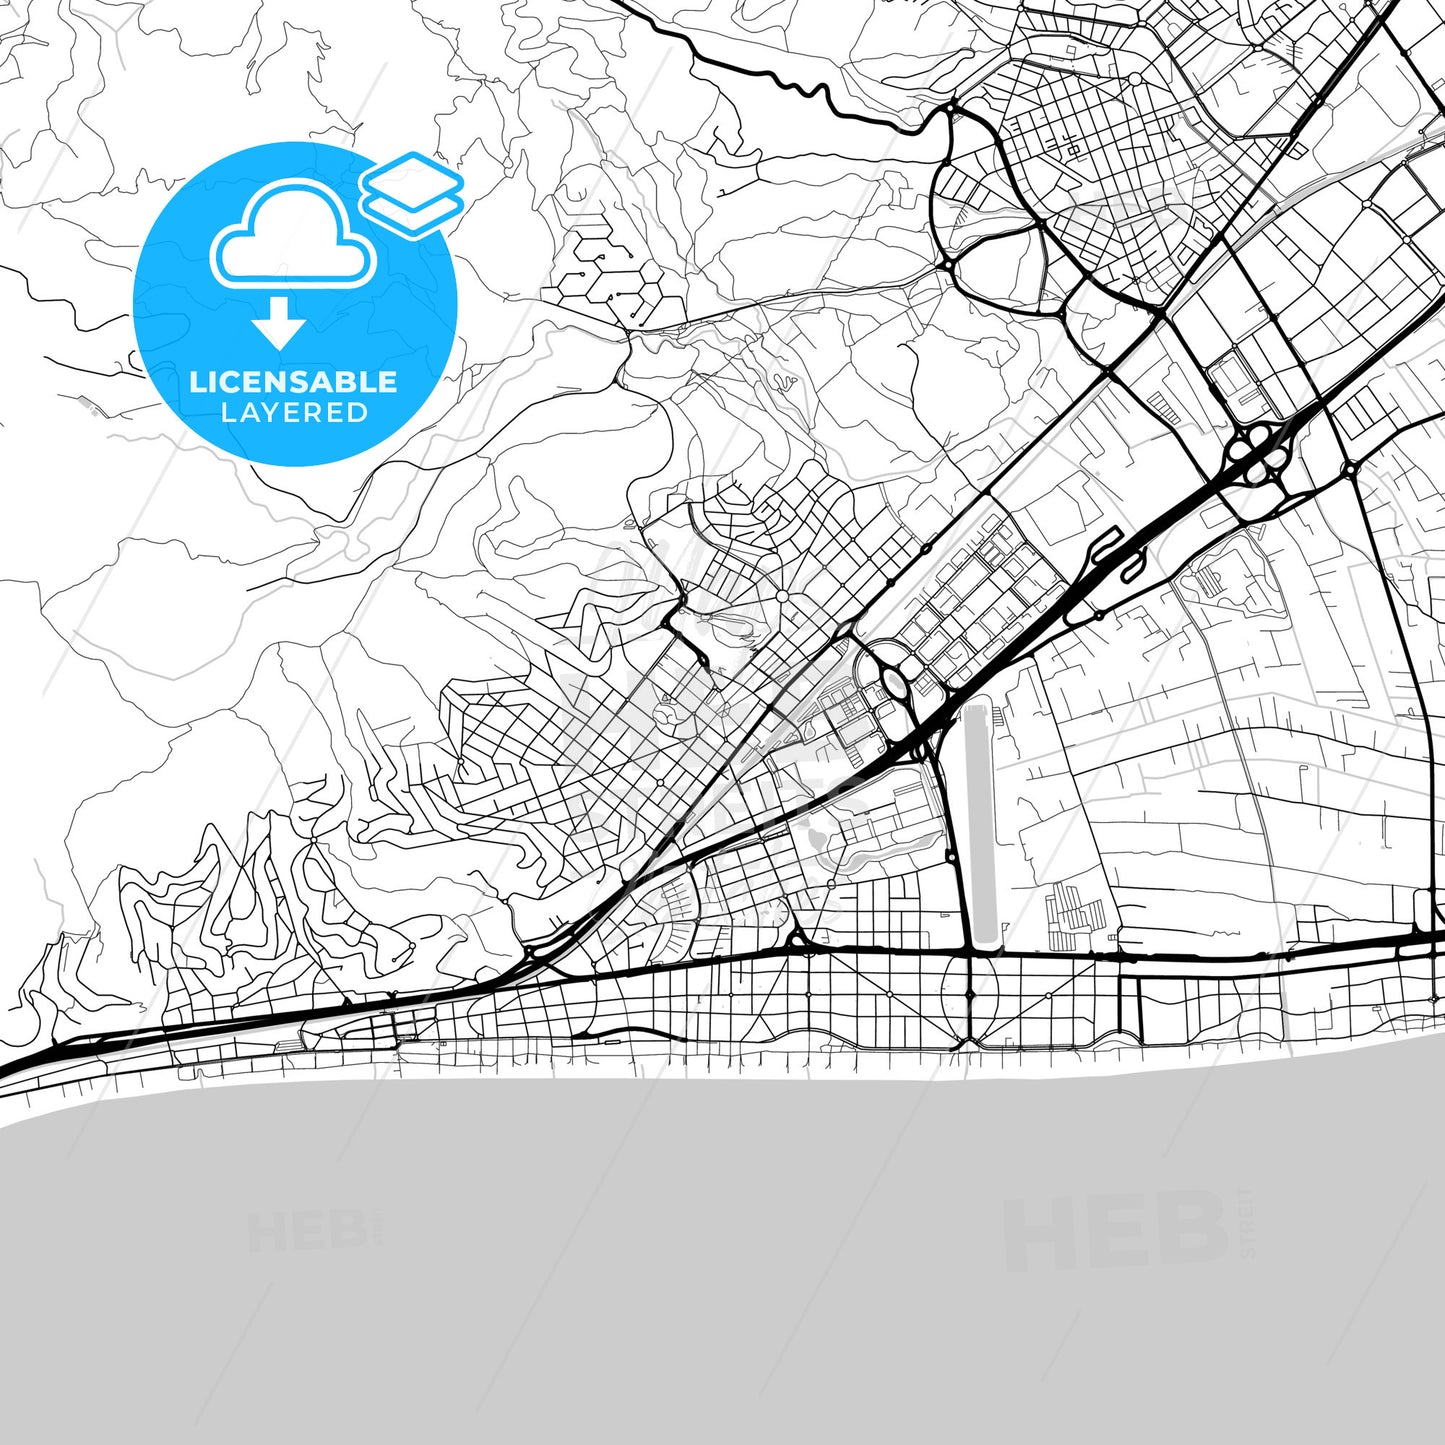 Layered PDF map of Castelldefels, Barcelona, Spain